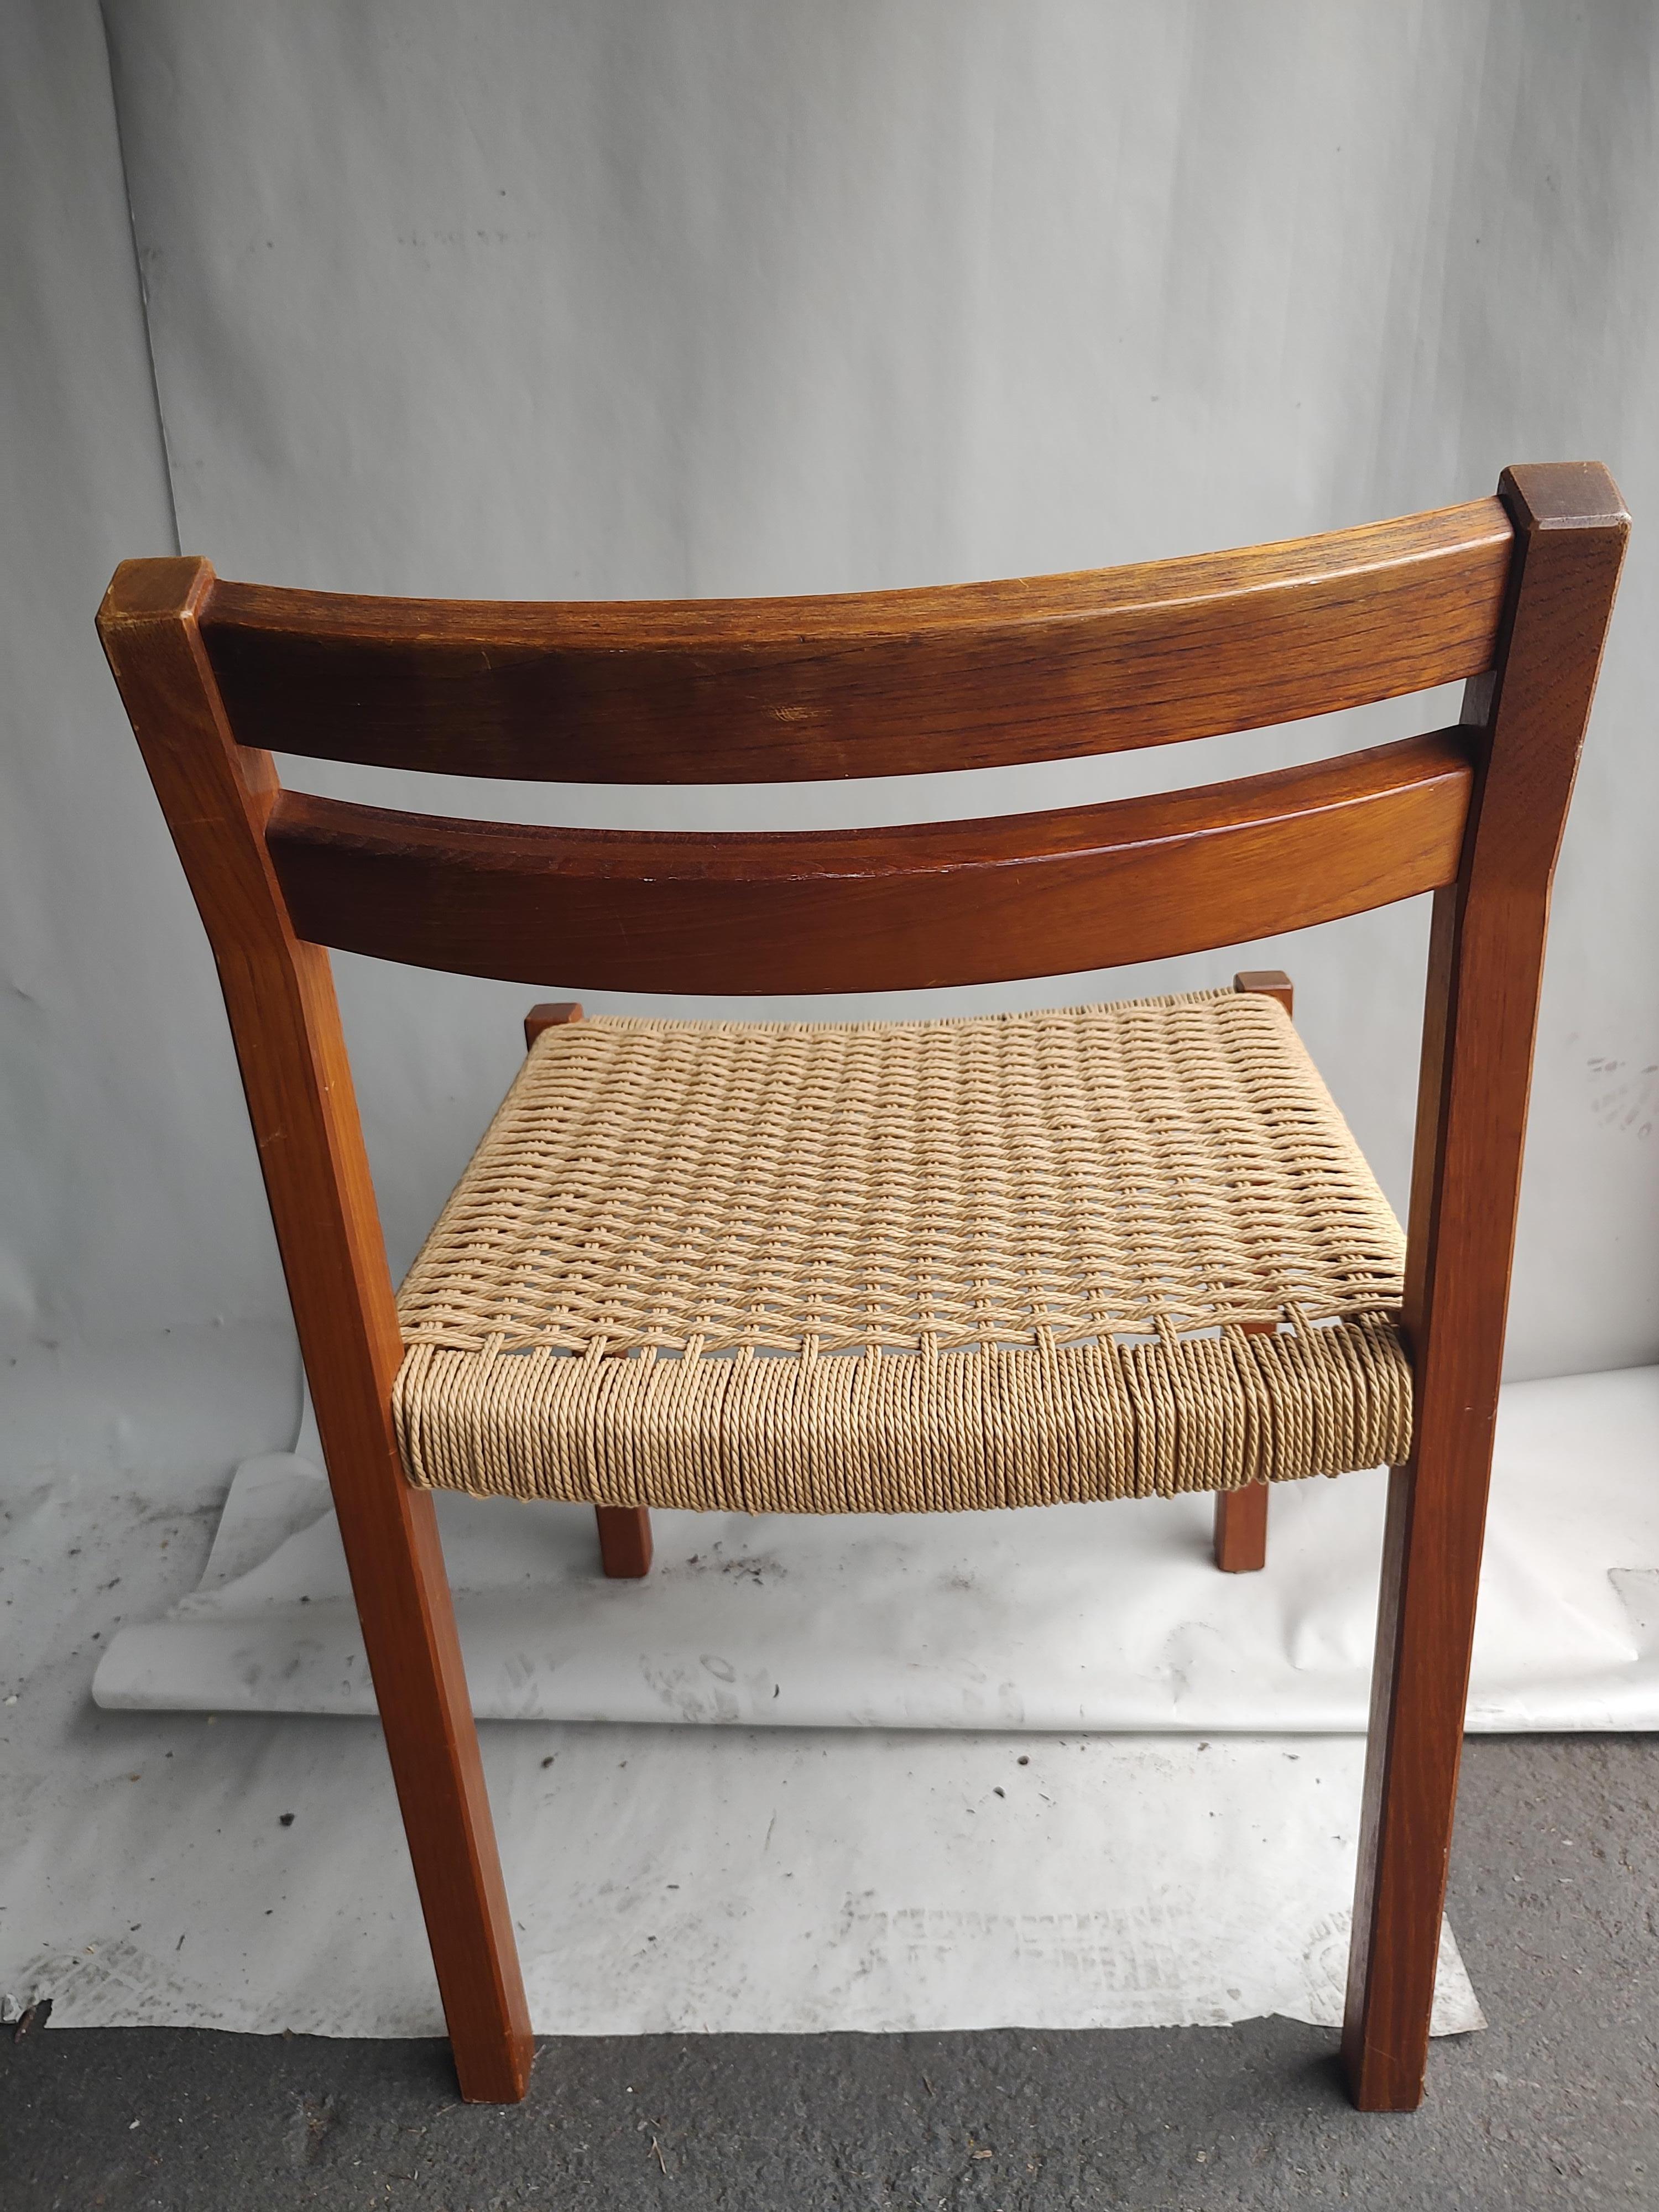 Hand-Crafted Mid-Century Modern Danish Teak Desk Dining Chair Rope Seat by Niels Moller C1970